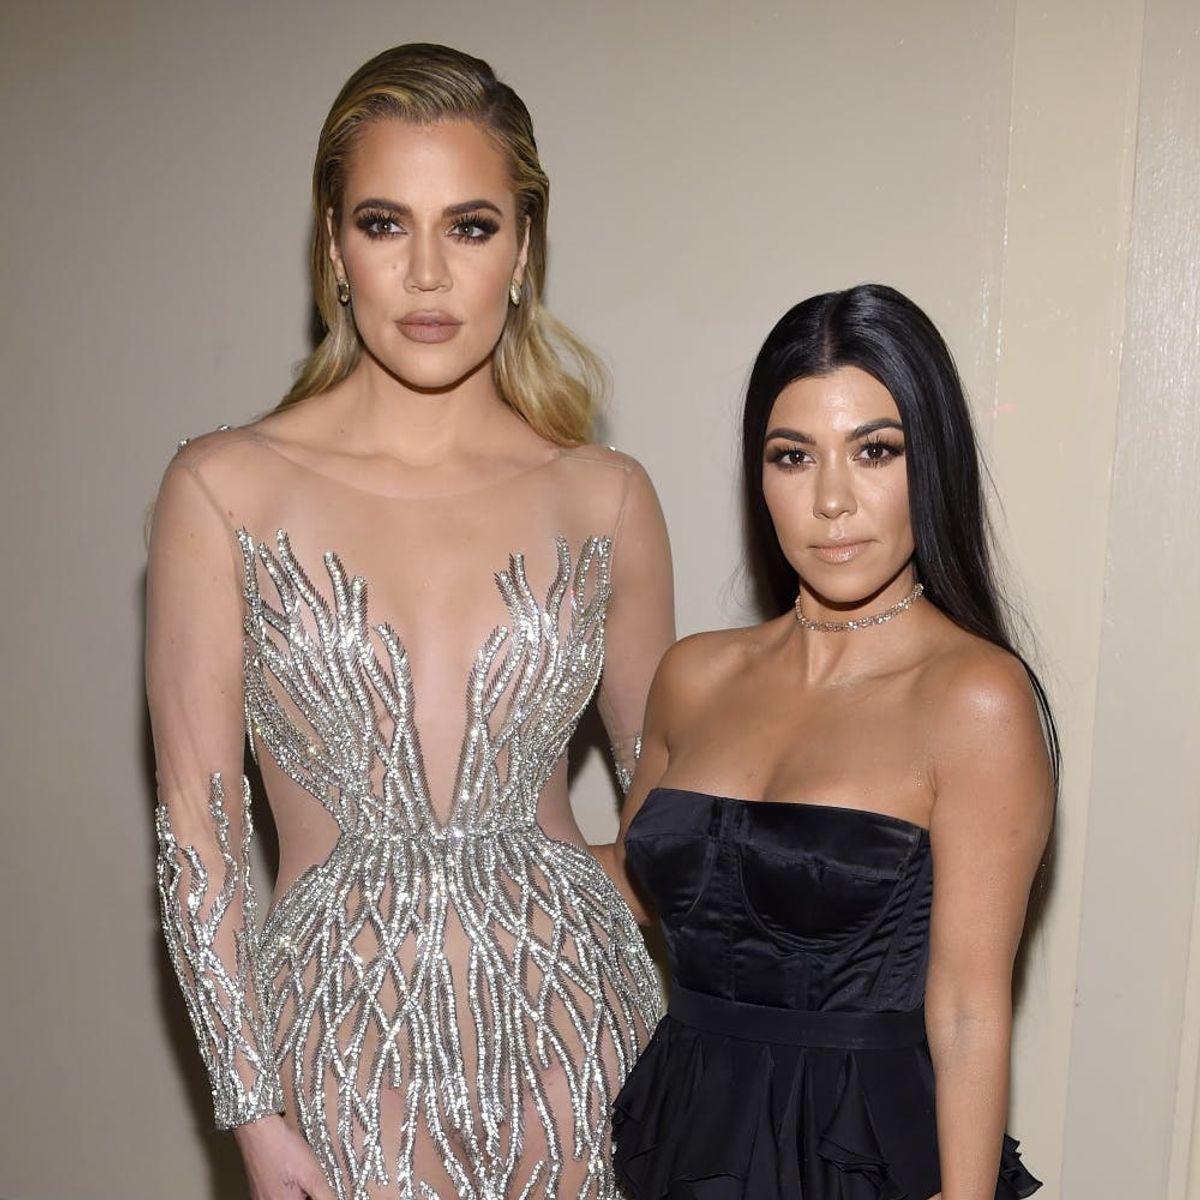 Kourtney and Khloé Kardashian Are Both Sparking Sizzling Hot Love Lives… But in Very Different Ways